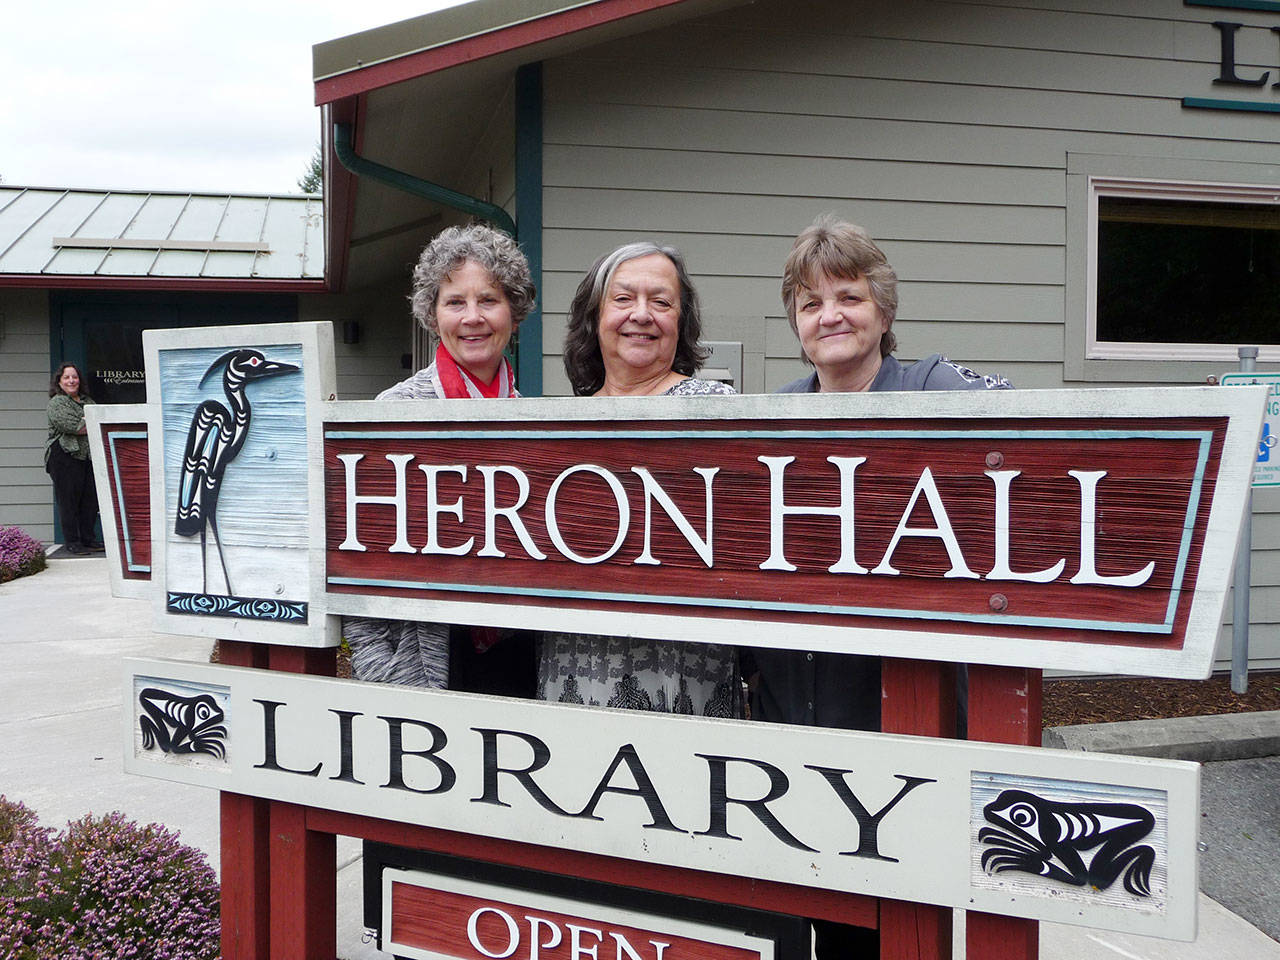 Staff members of the Jamestown S’Klallam Tribal Library are, from left, librarian Bonnie Roos, tribal elder Gloria Smith and Jan Jacobson. Sequim Gazette photo by Patricia Morrison Coate